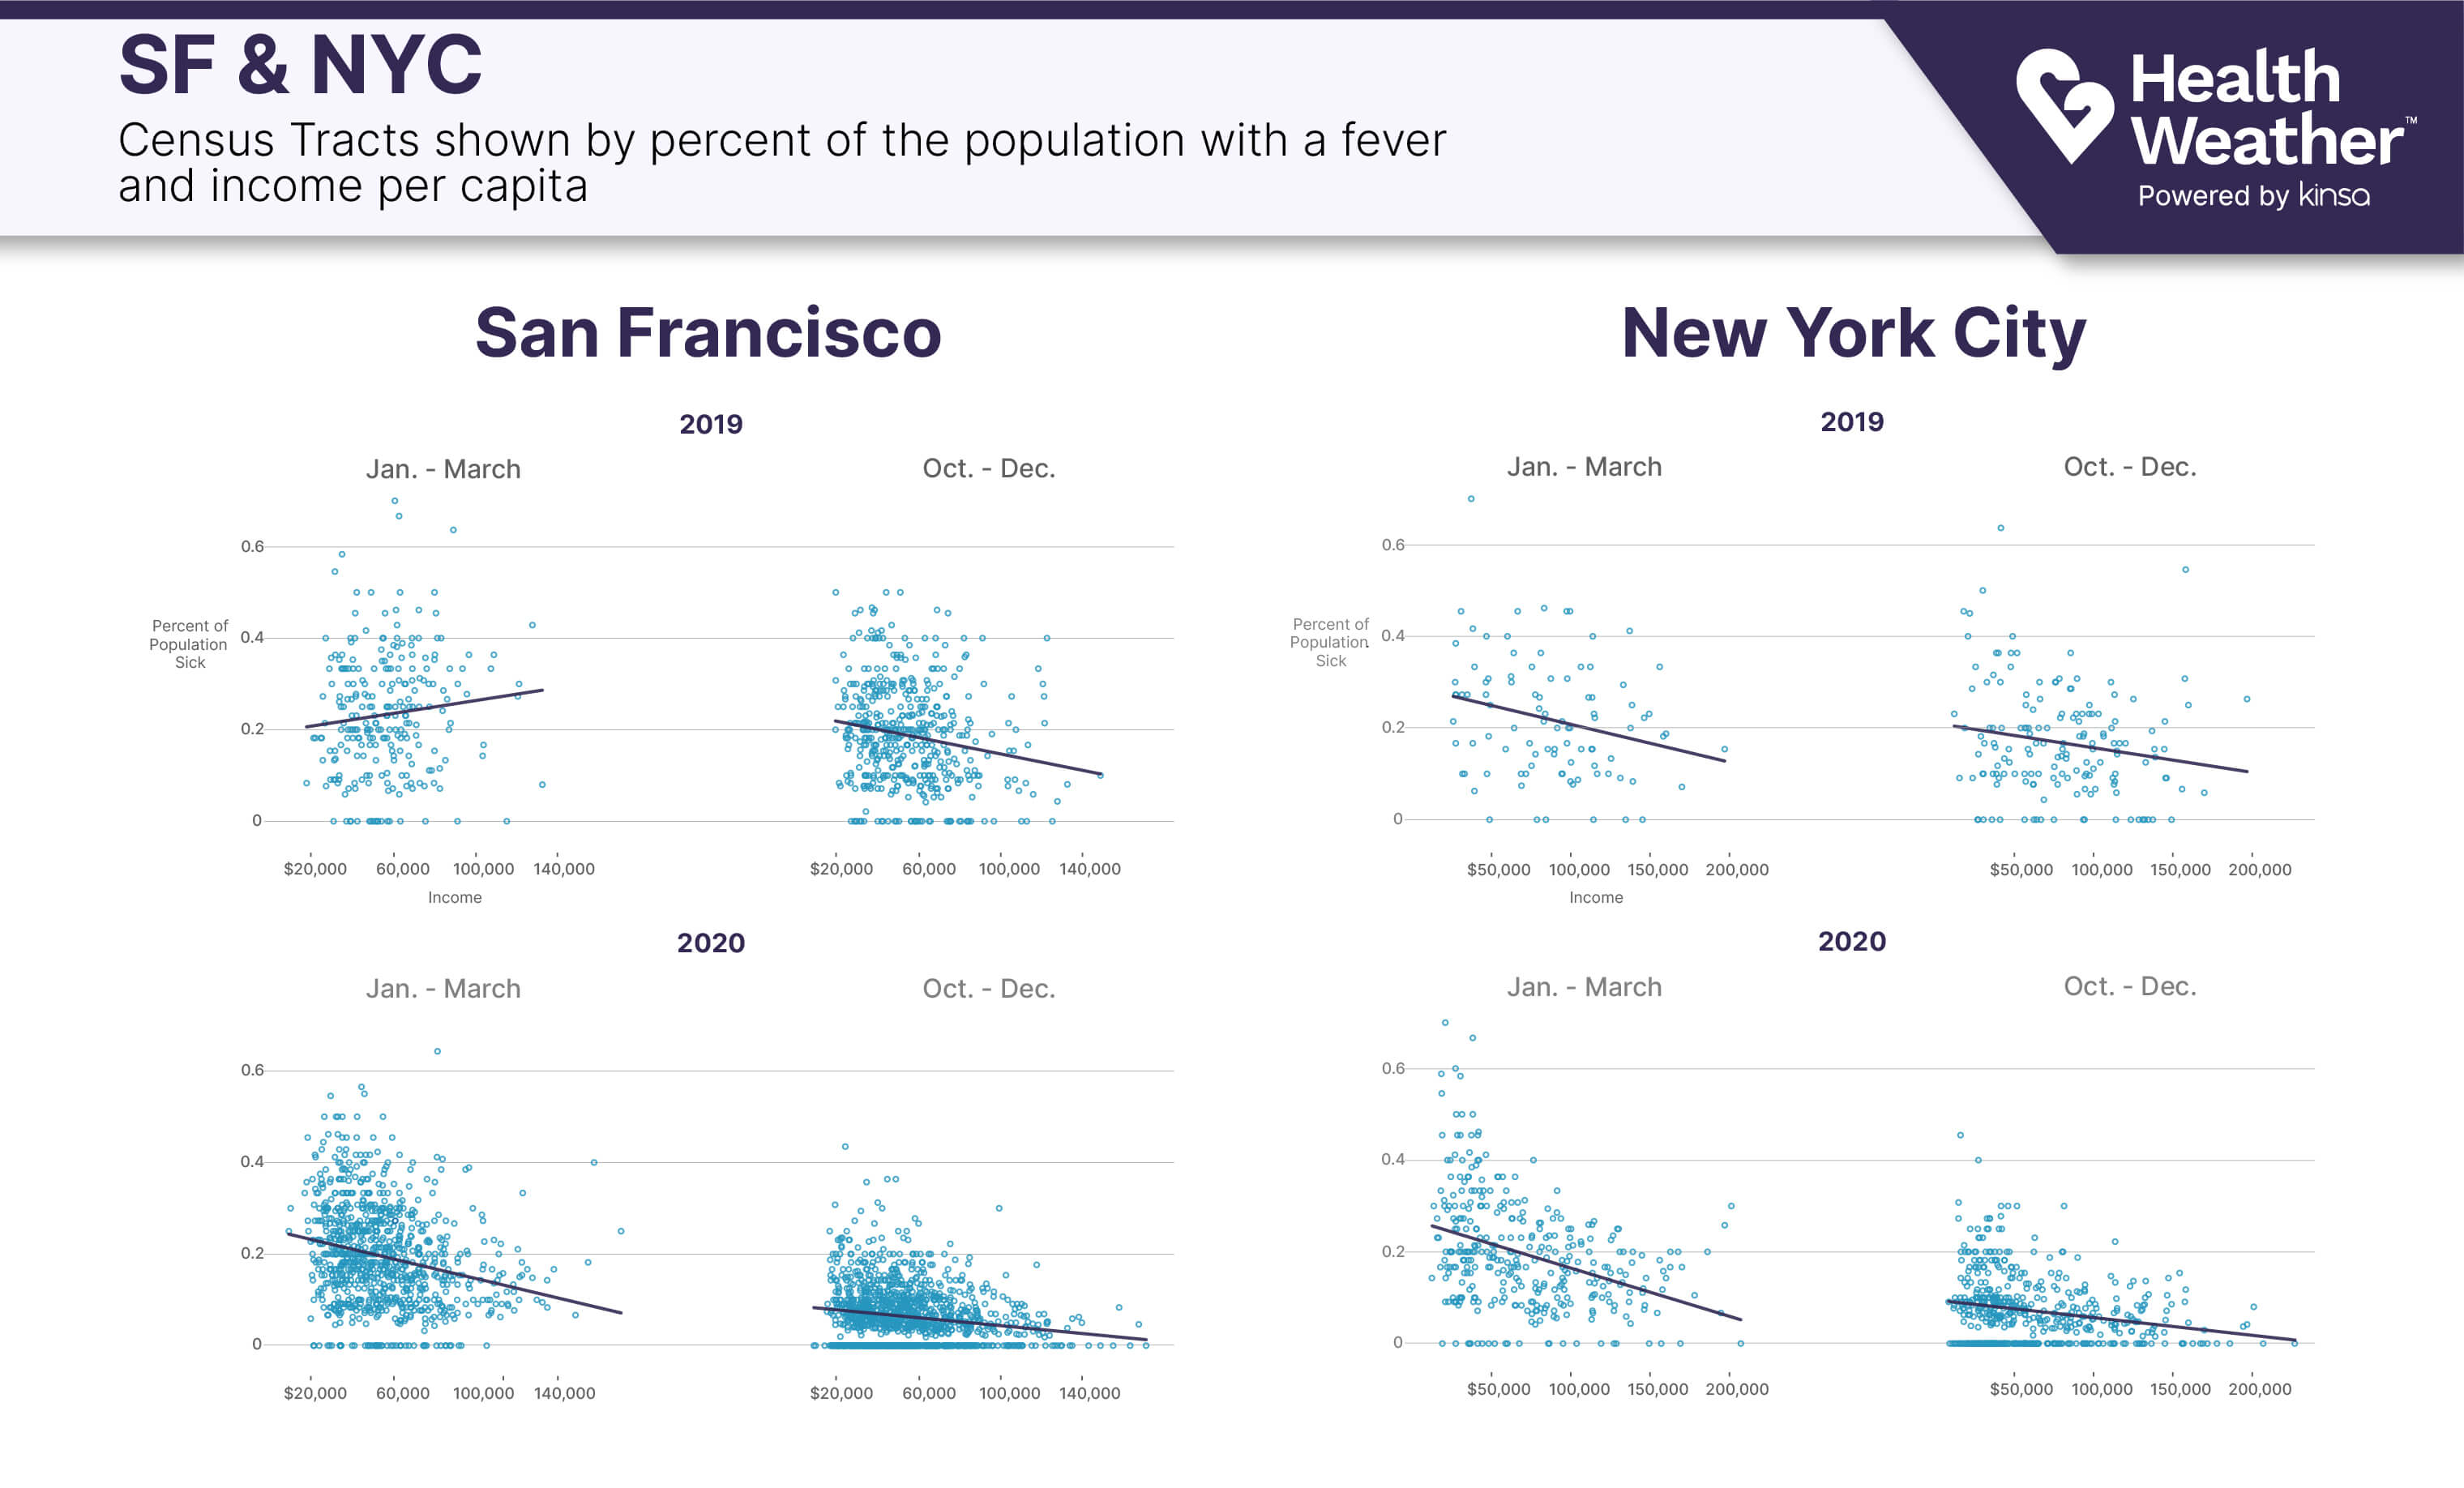 Illness by income in SF and NYC, 2019-2020